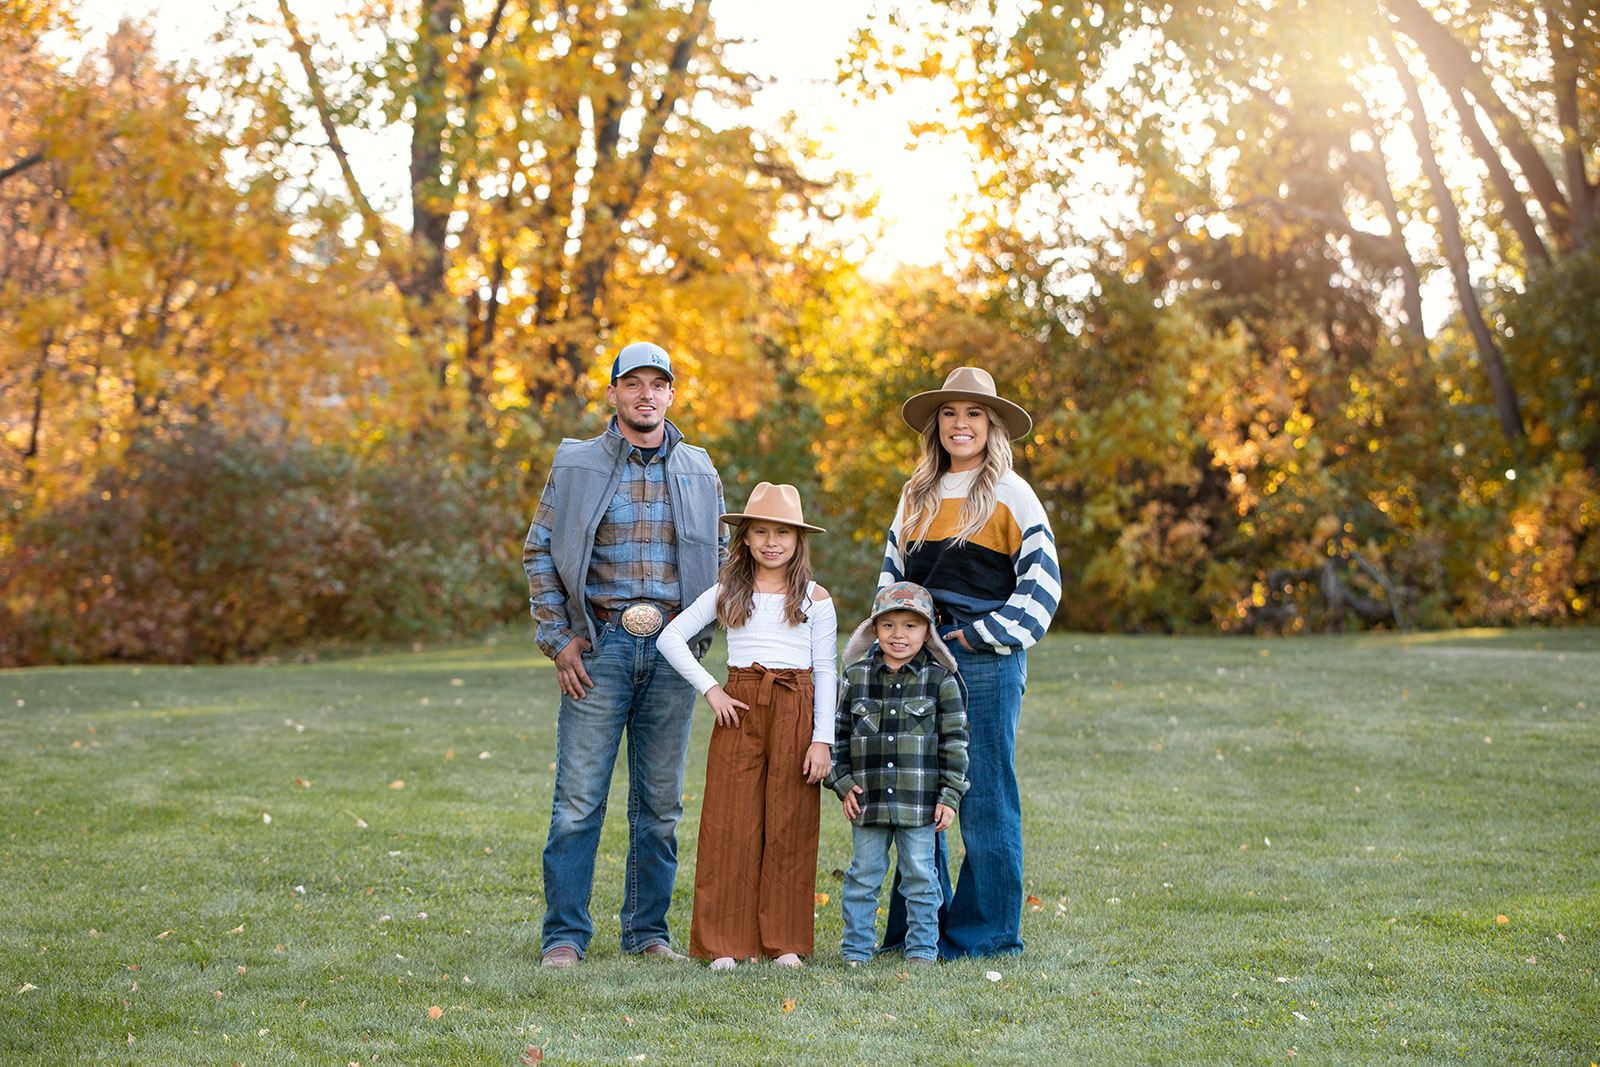 Family photography is good for your children